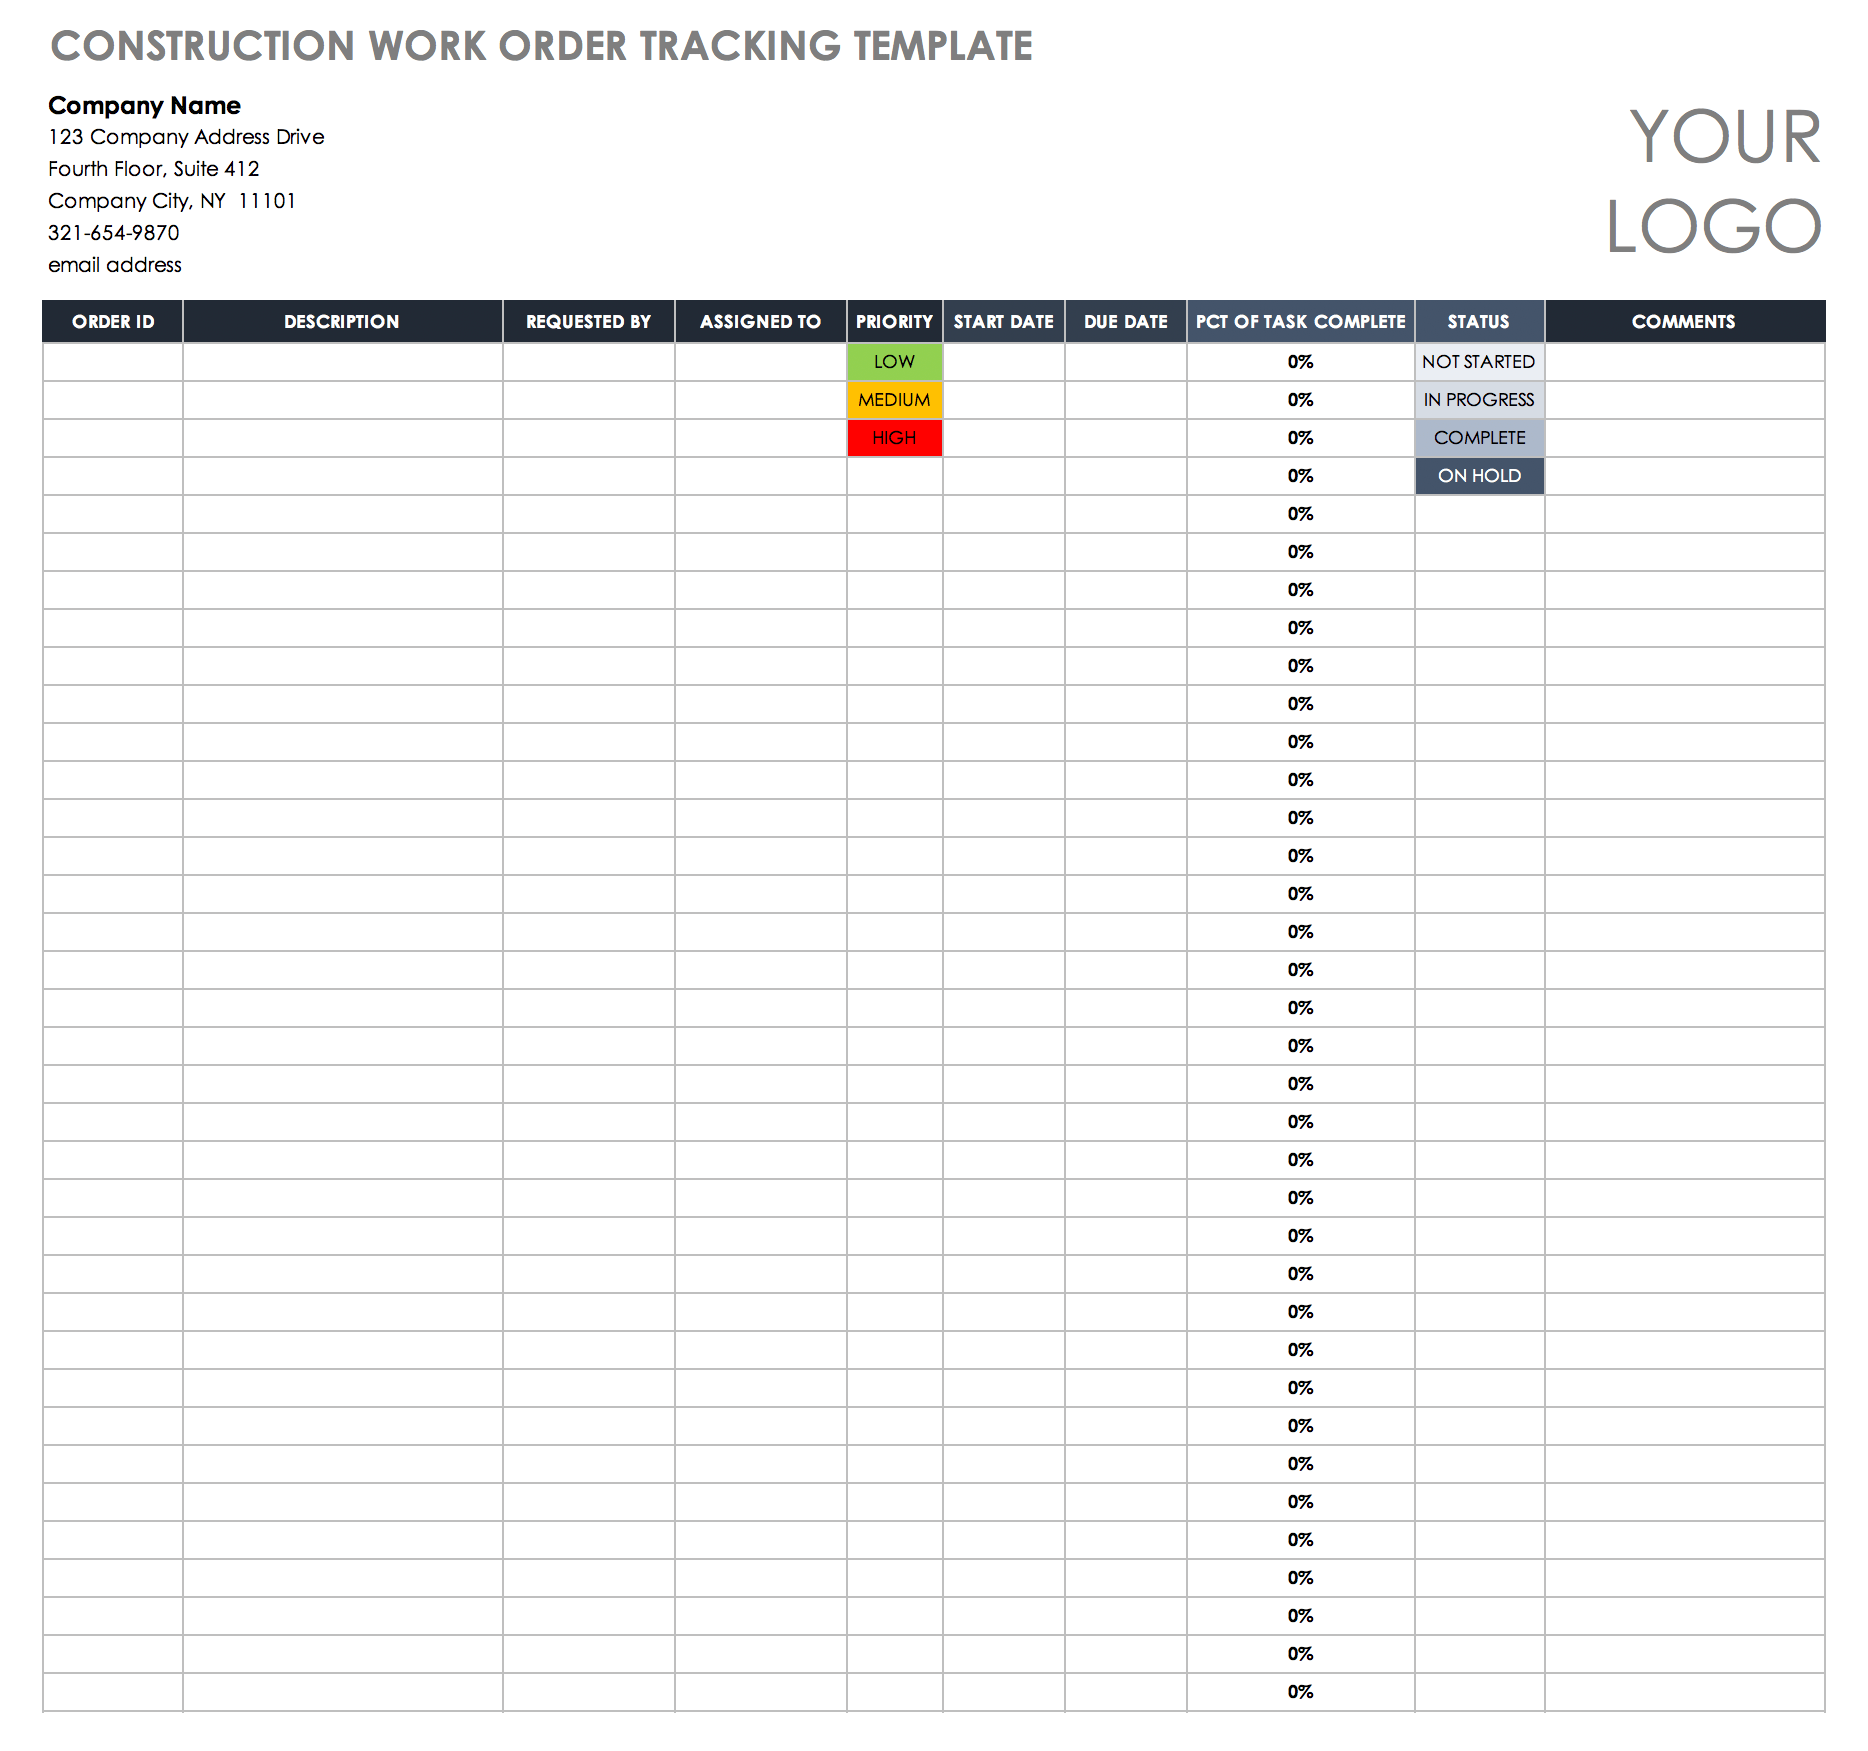 Construction Work Order Tracking Template